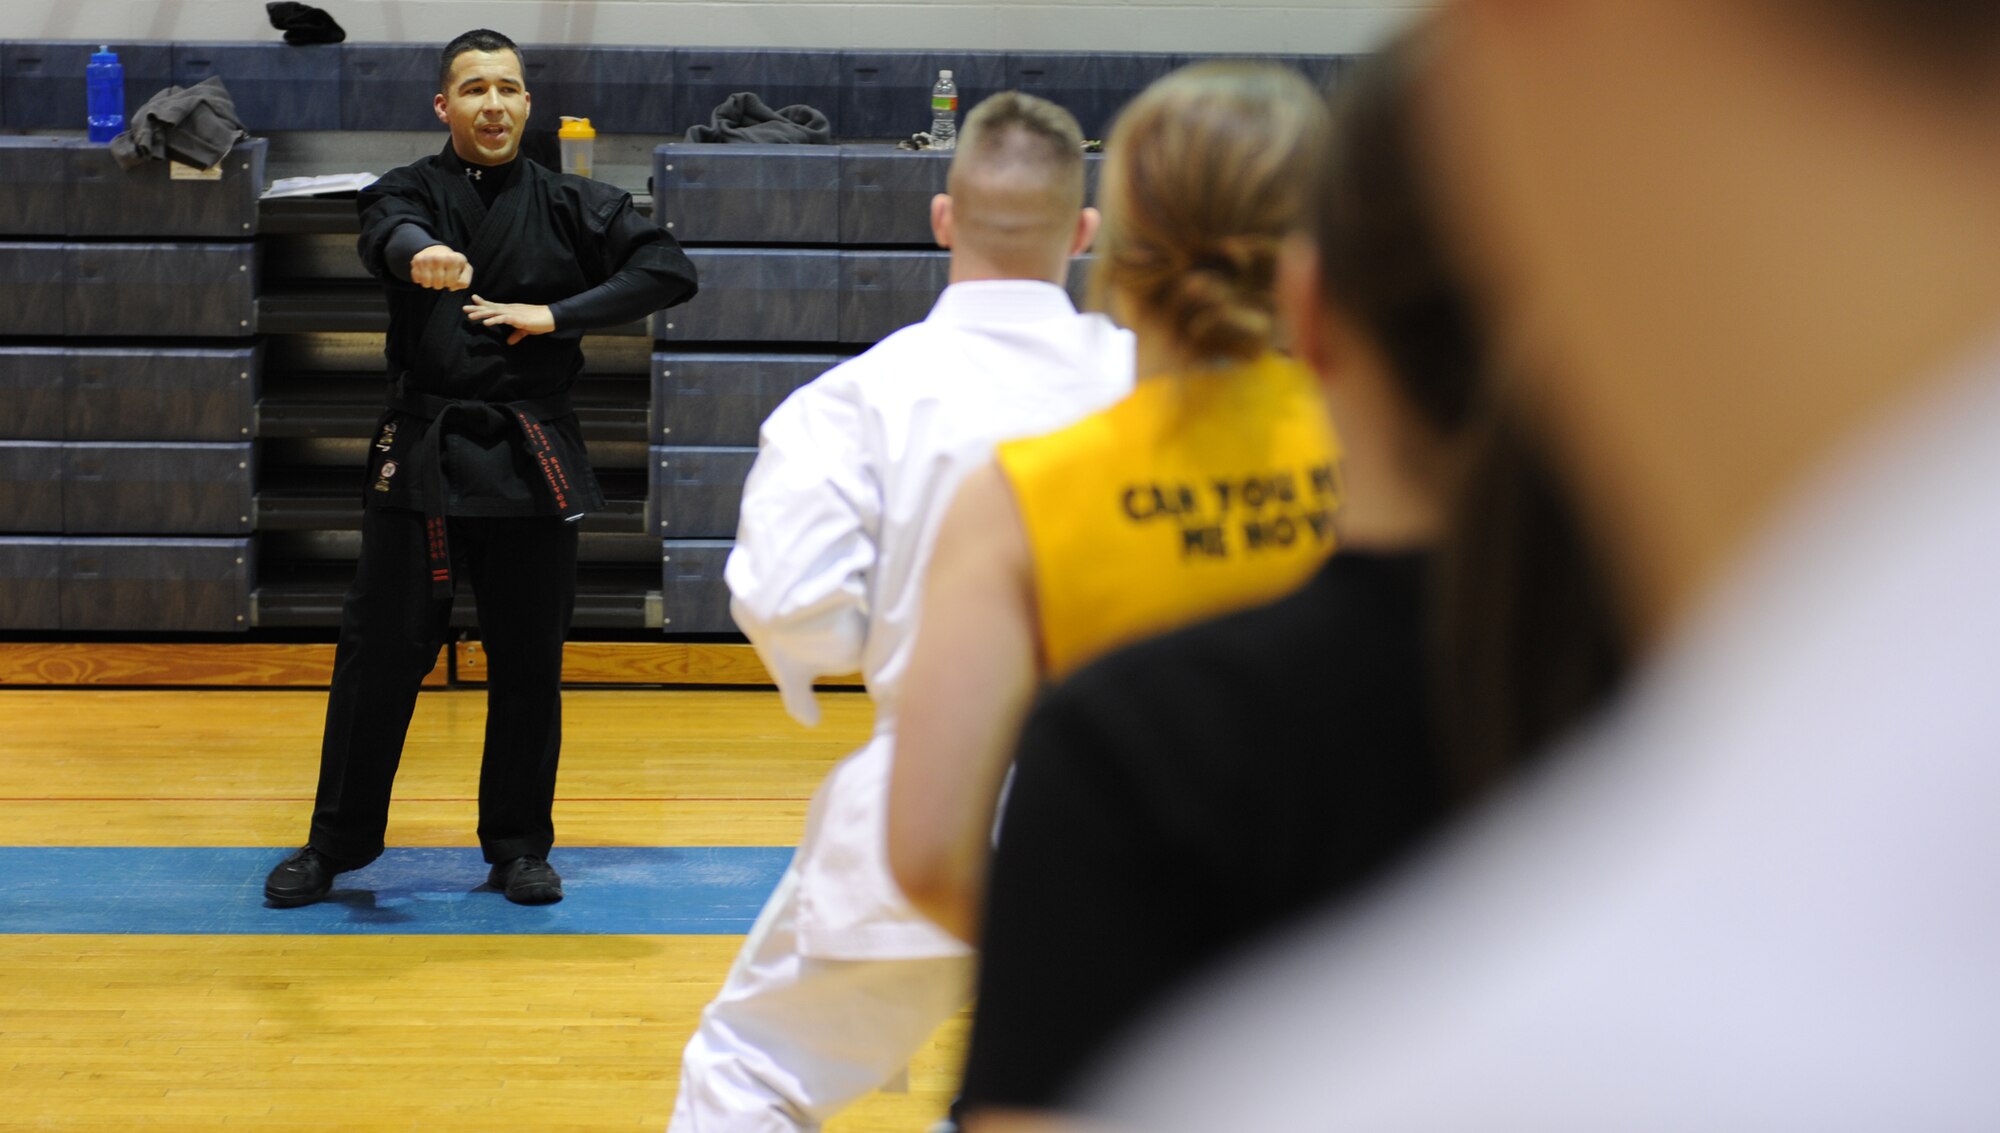 WHITEMAN AIR FORCE BASE, Mo. – Sensei Larry Tolliver, Kenpo instructor, instructs his class Feb. 2. Kenpo is a Japanese term that translates to mean “Law of the Fist.” Classes are Mondays and Wednesdays from 5 – 6 p.m. at the fitness center for $8 a class.  (U.S. Air Force photo/Senior Airman Stephen Linch)